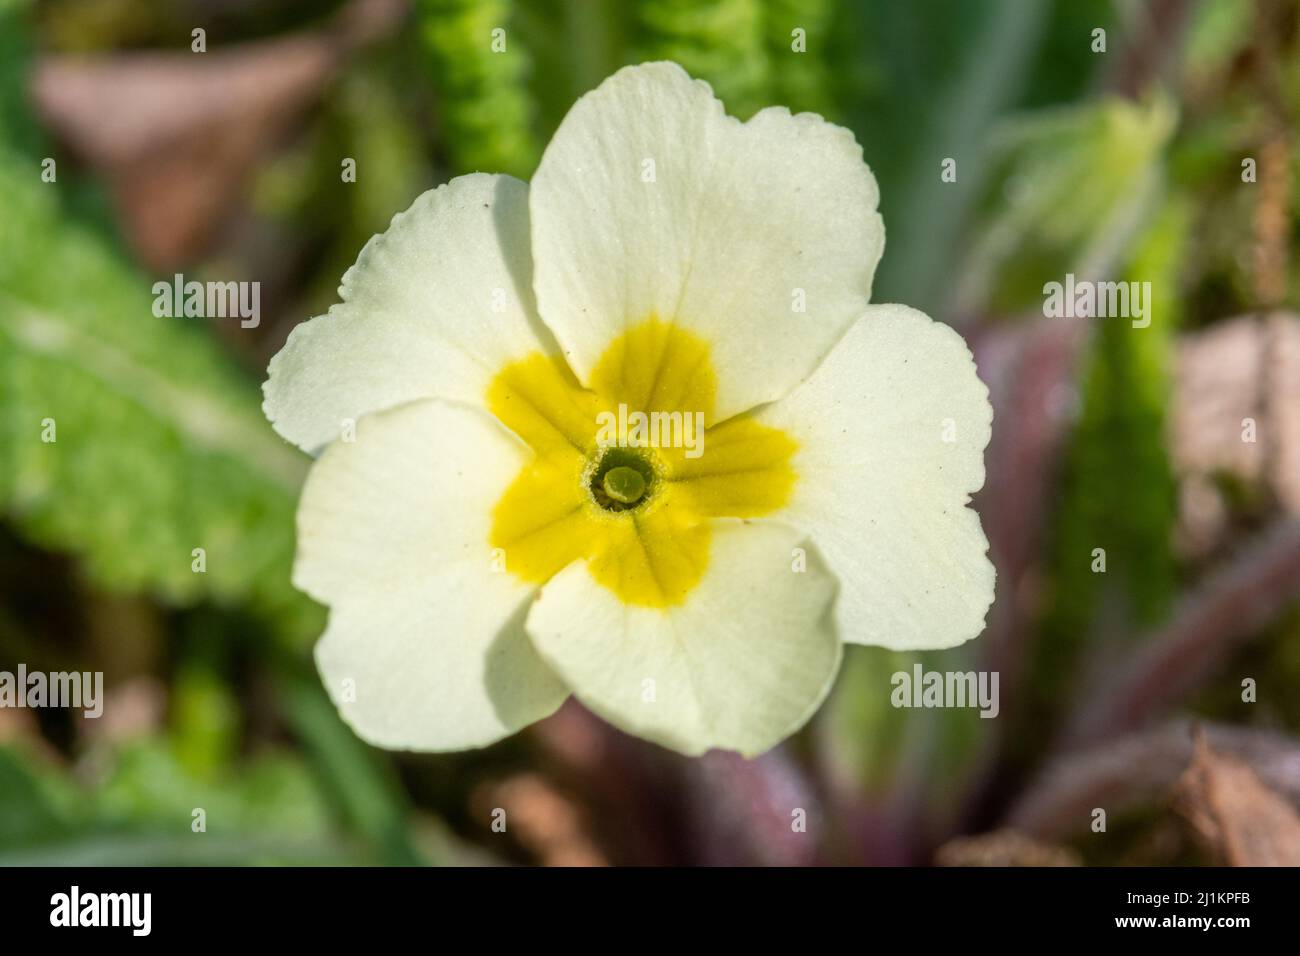 Primrose (Primula vulgaris), close-up of the spring wildflower flowering during March, England, UK. A pin-eyed flower type. Stock Photo